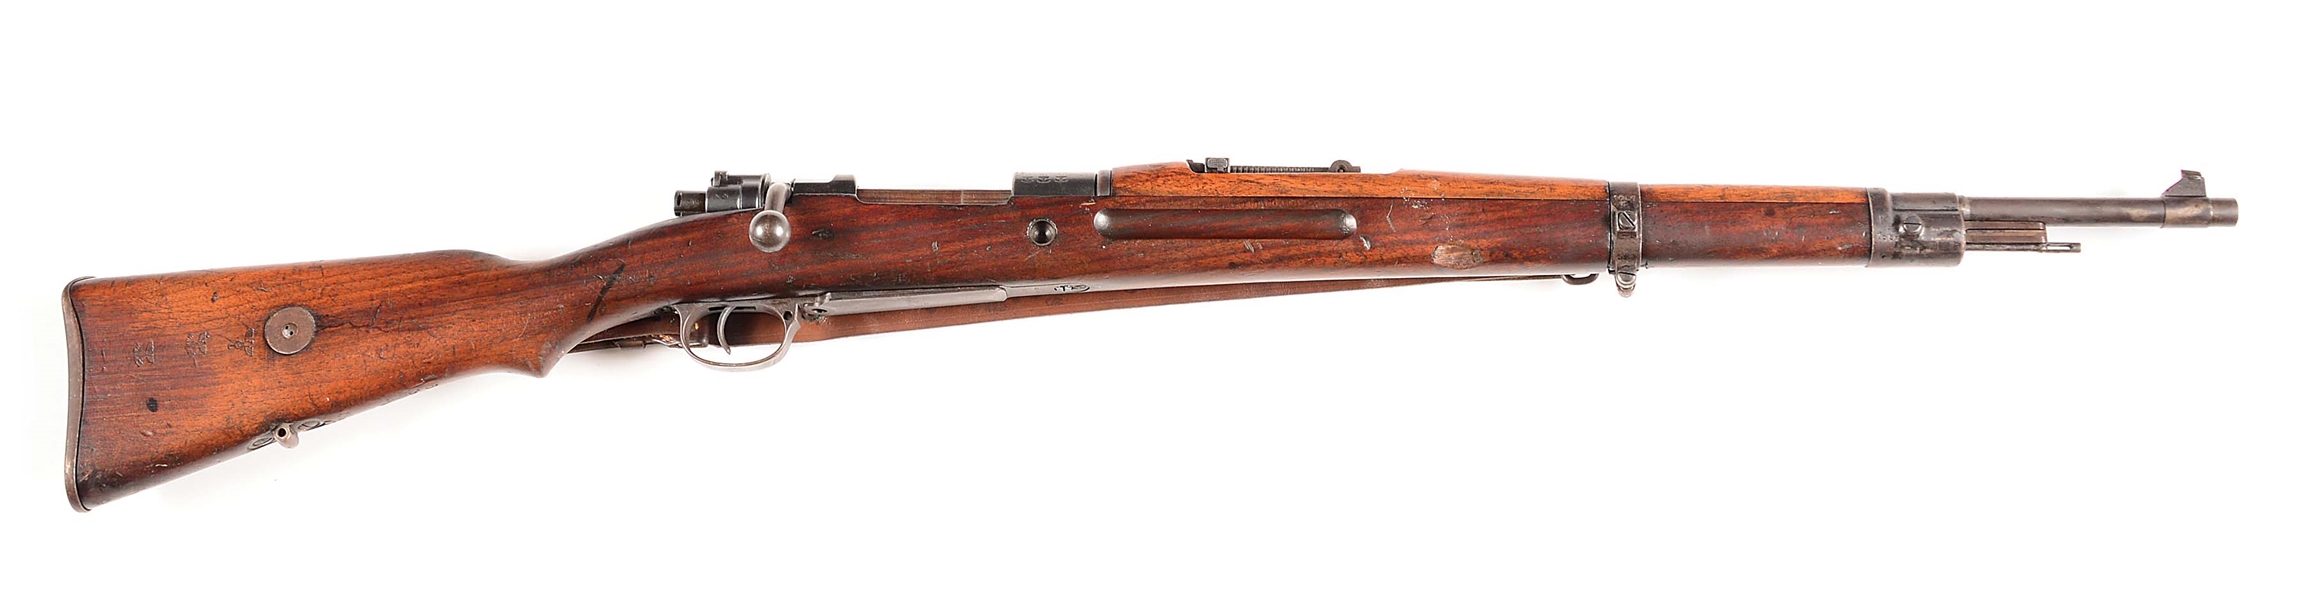 (C) EXTREMELY SCARCE AND DESIRABLE GERMAN WORLD WAR II LUFTWAFFE MARKED STEYR "660/ 1938" CODE G29(O) BOLT ACTION RIFLE.